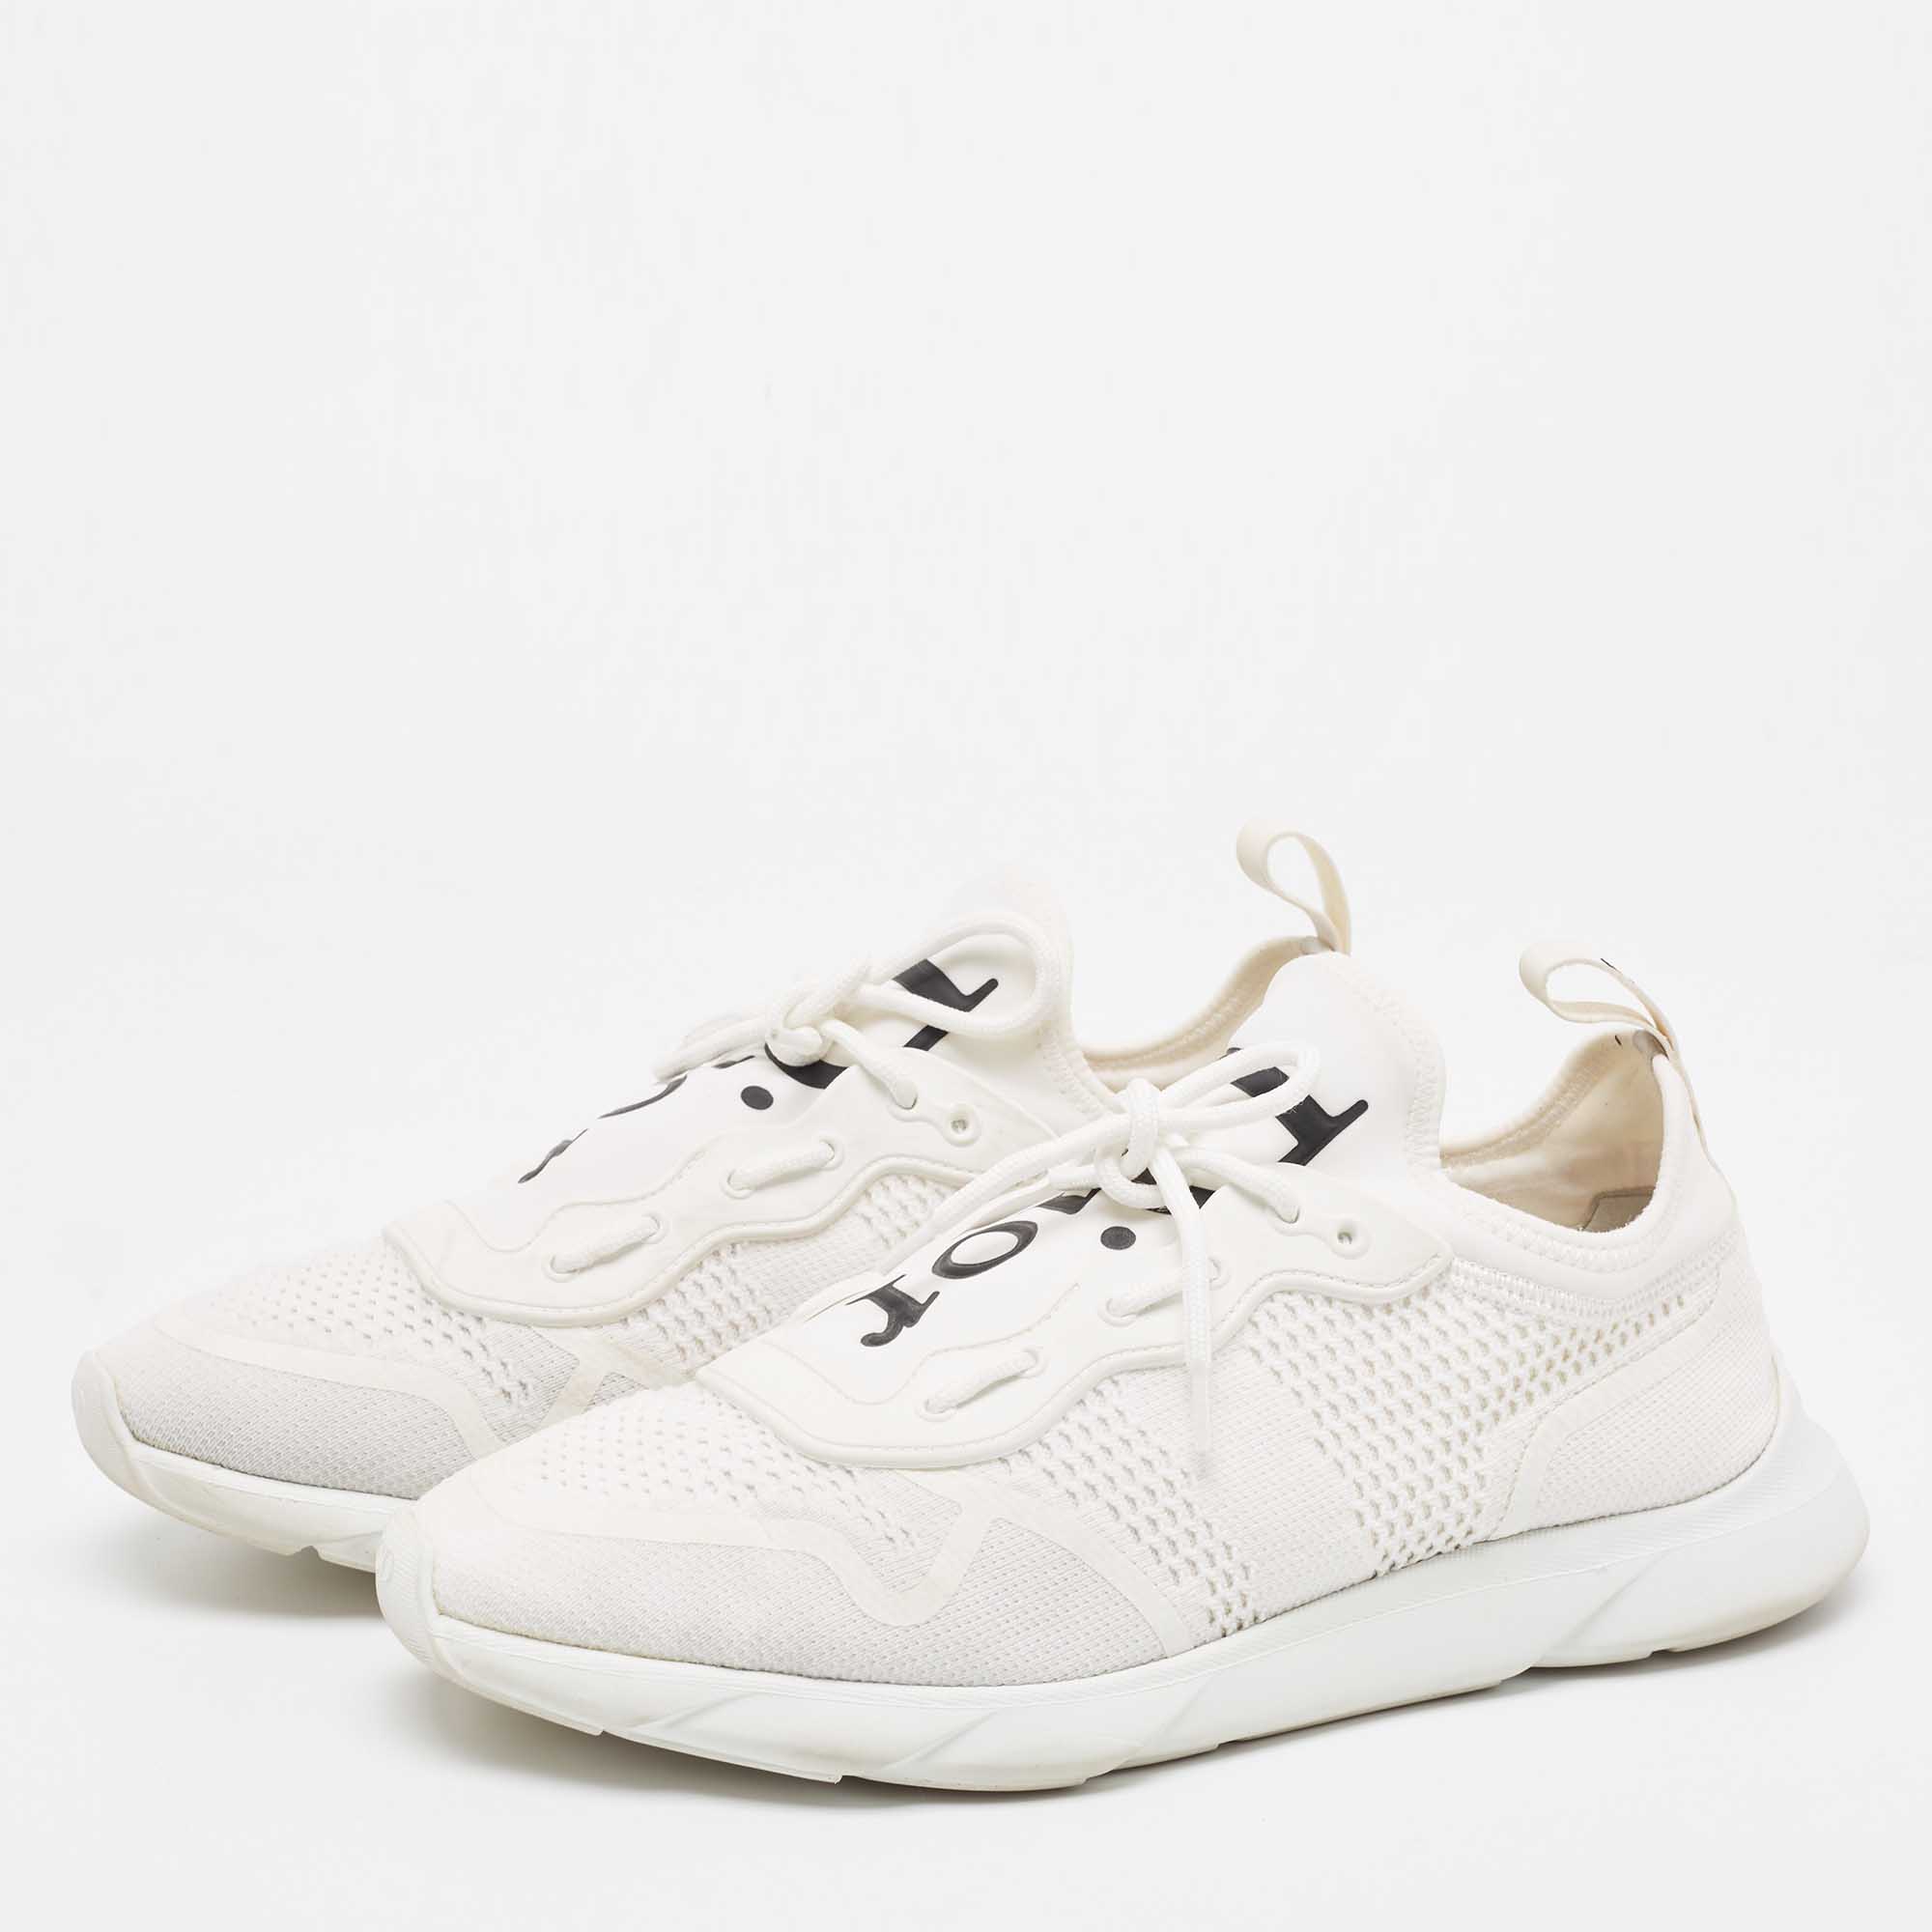 

Dior White Knit Fabric B21 Neo Low Top Sneakers Size